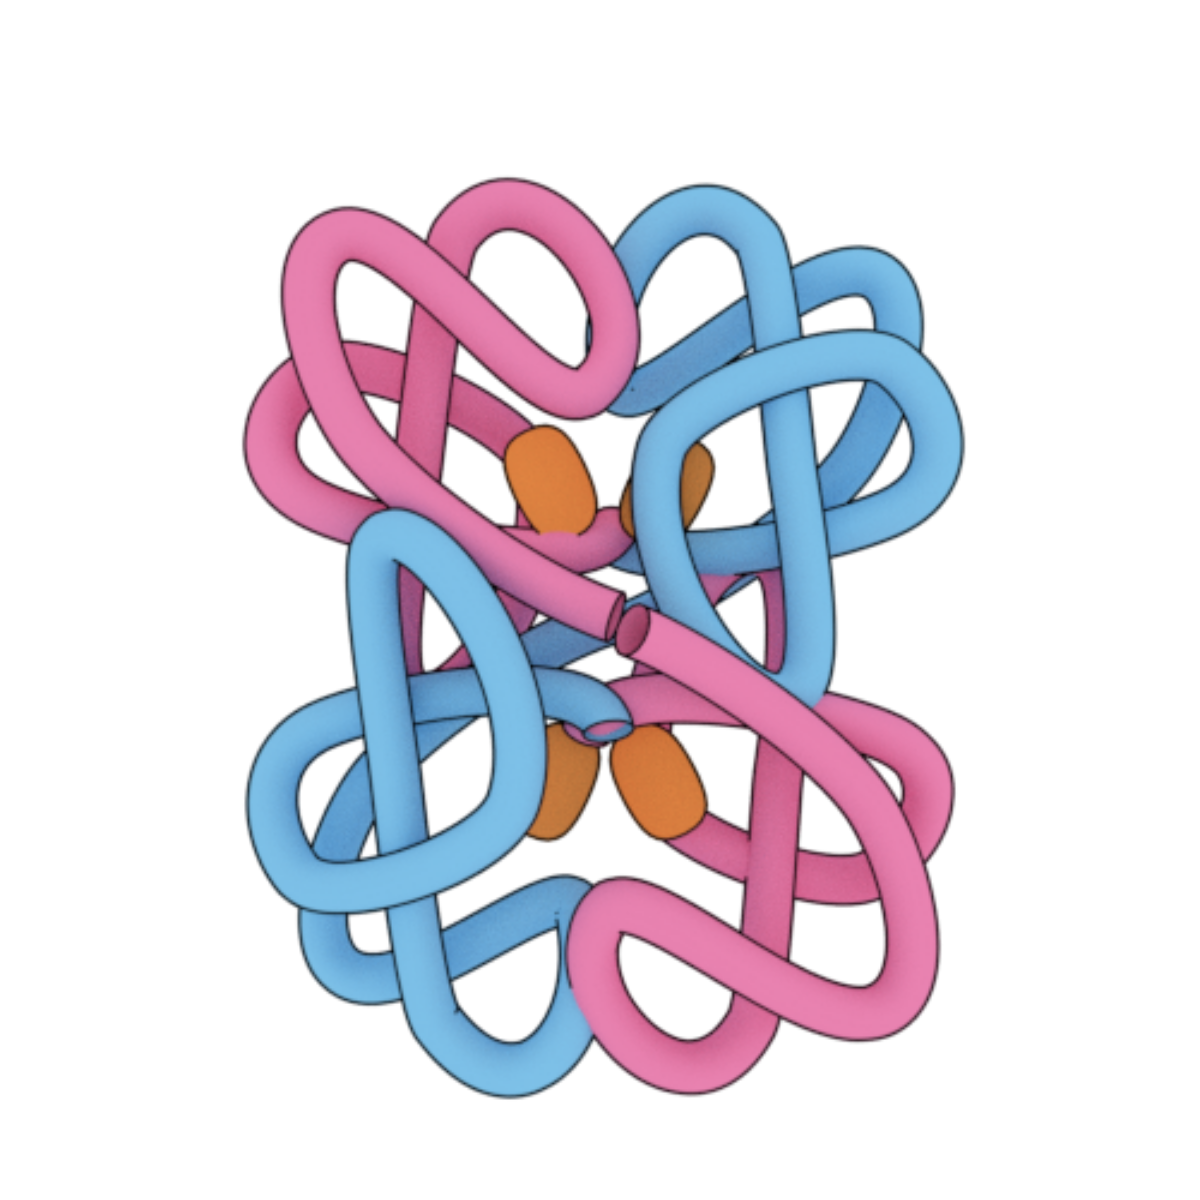 quaternary structure of proteins